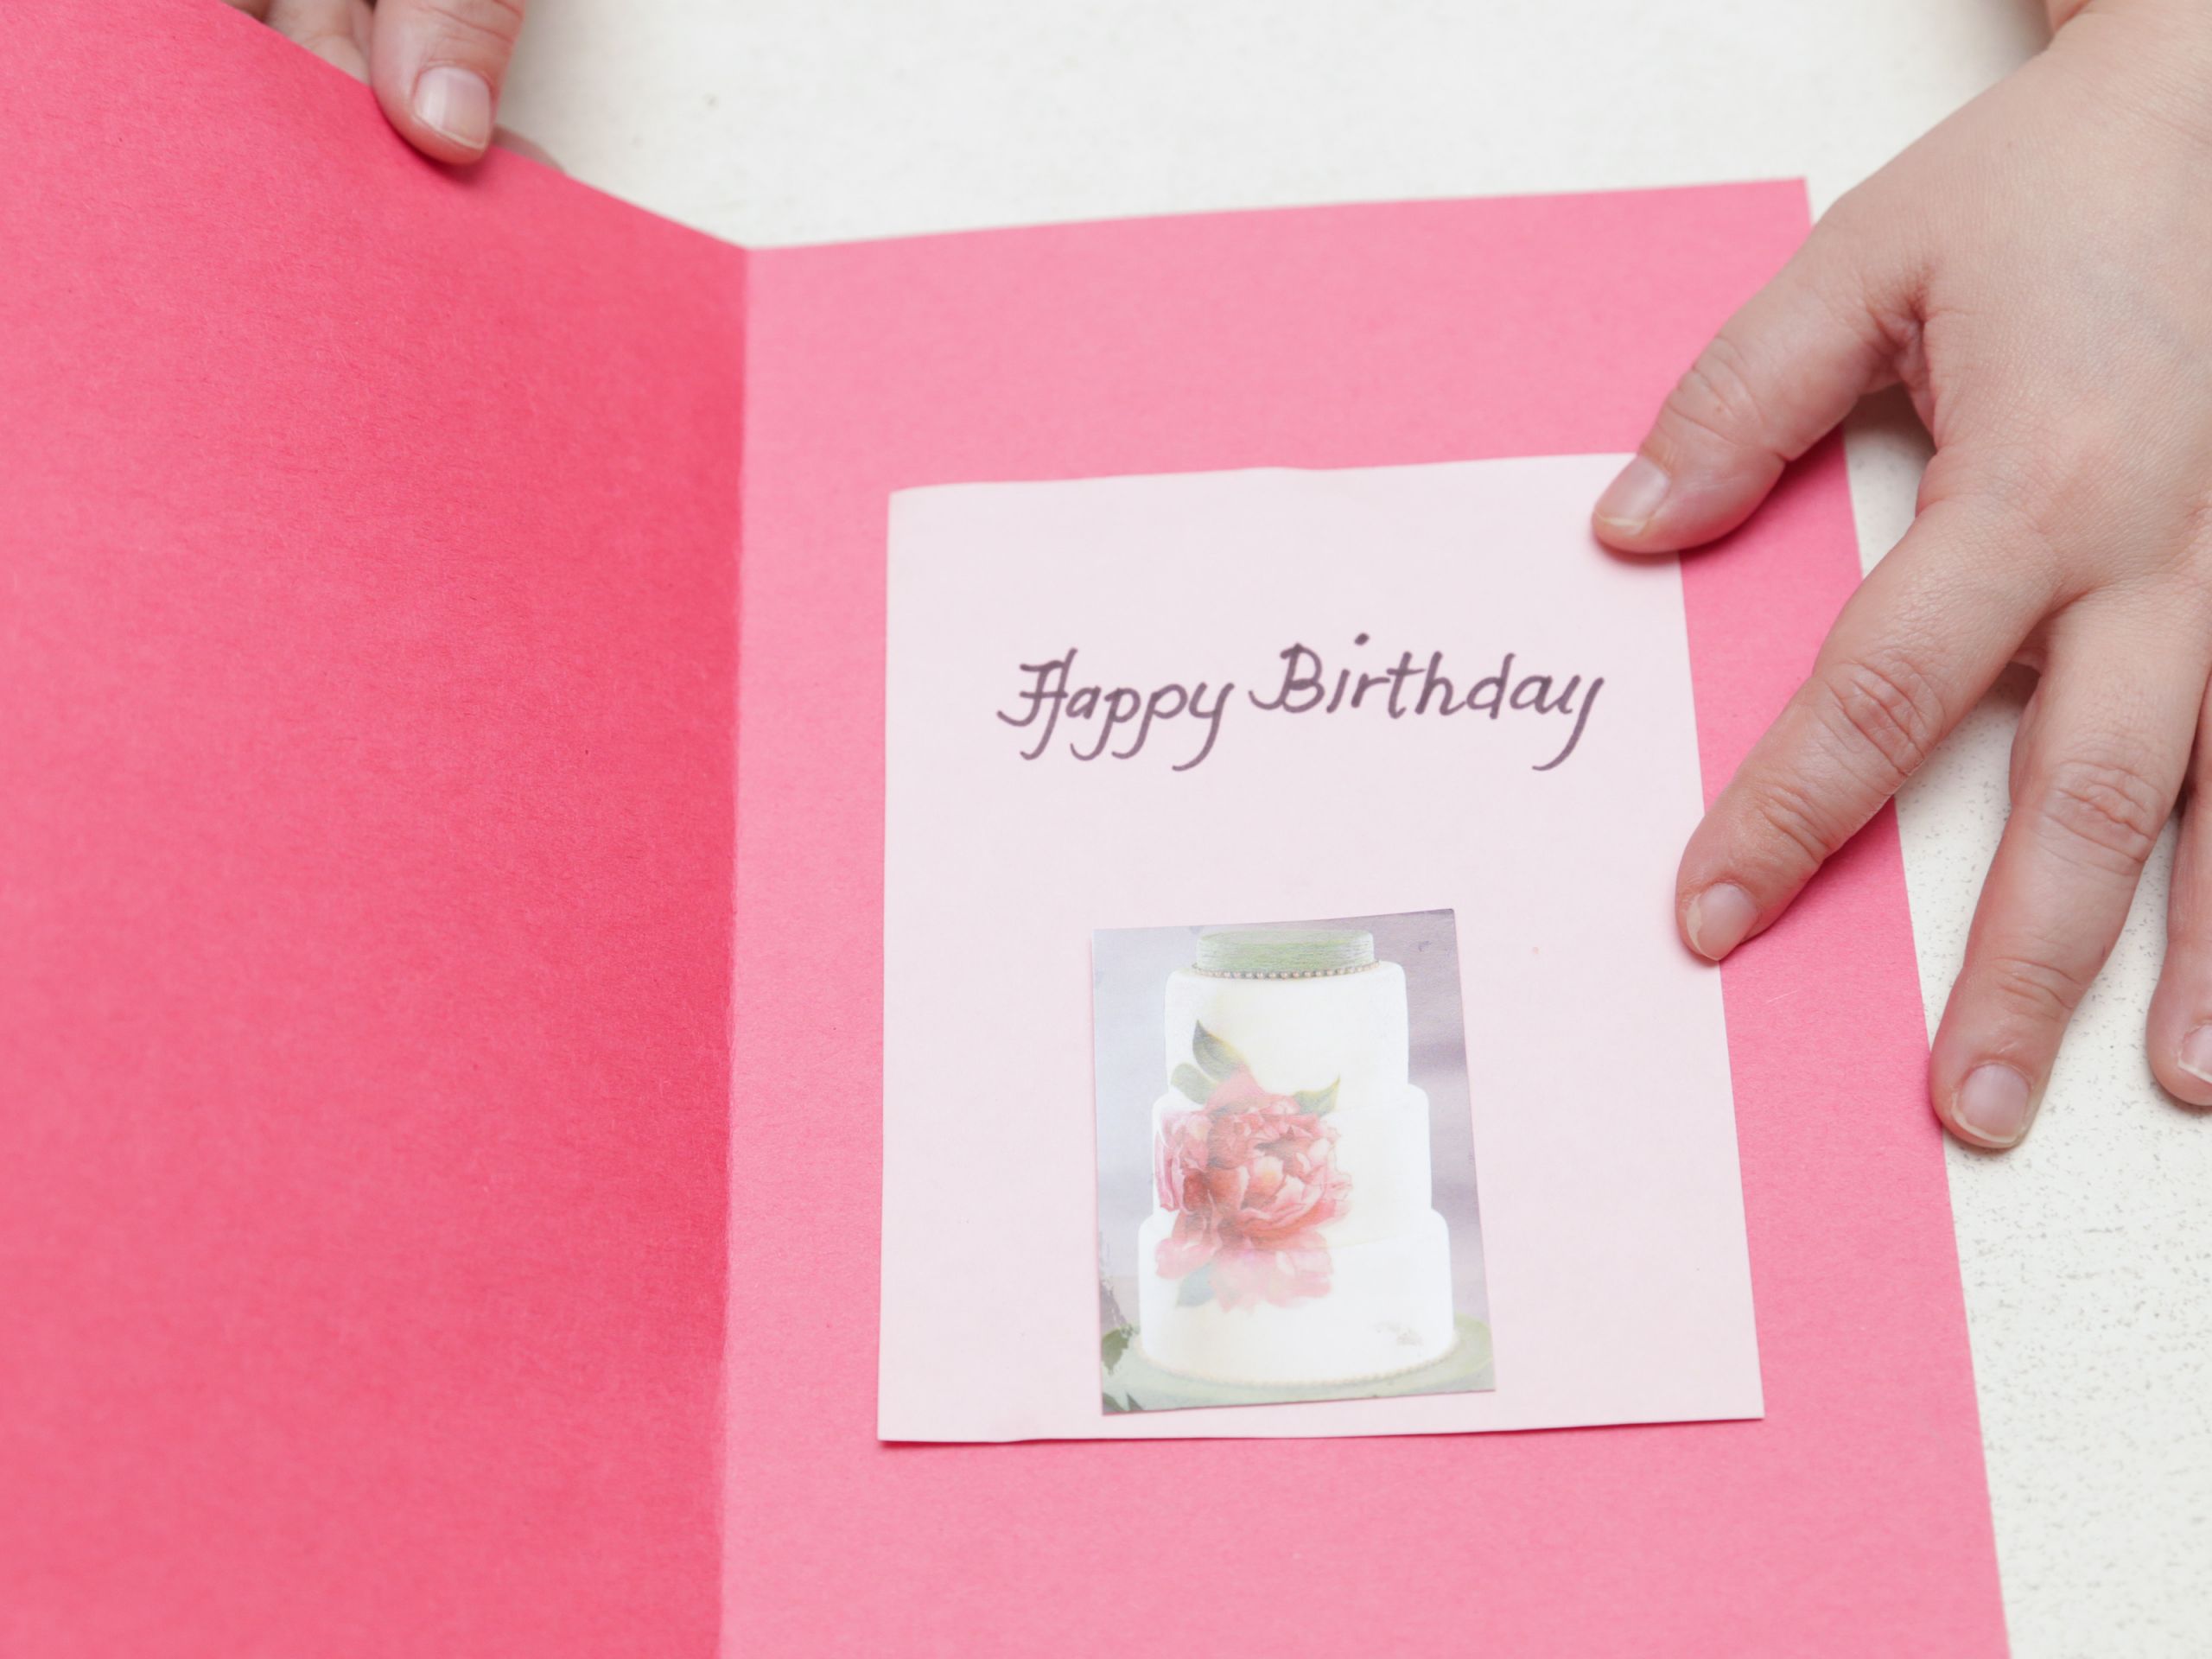 Making Birthday Cards
 4 Ways to Make a Simple Birthday Card at Home wikiHow